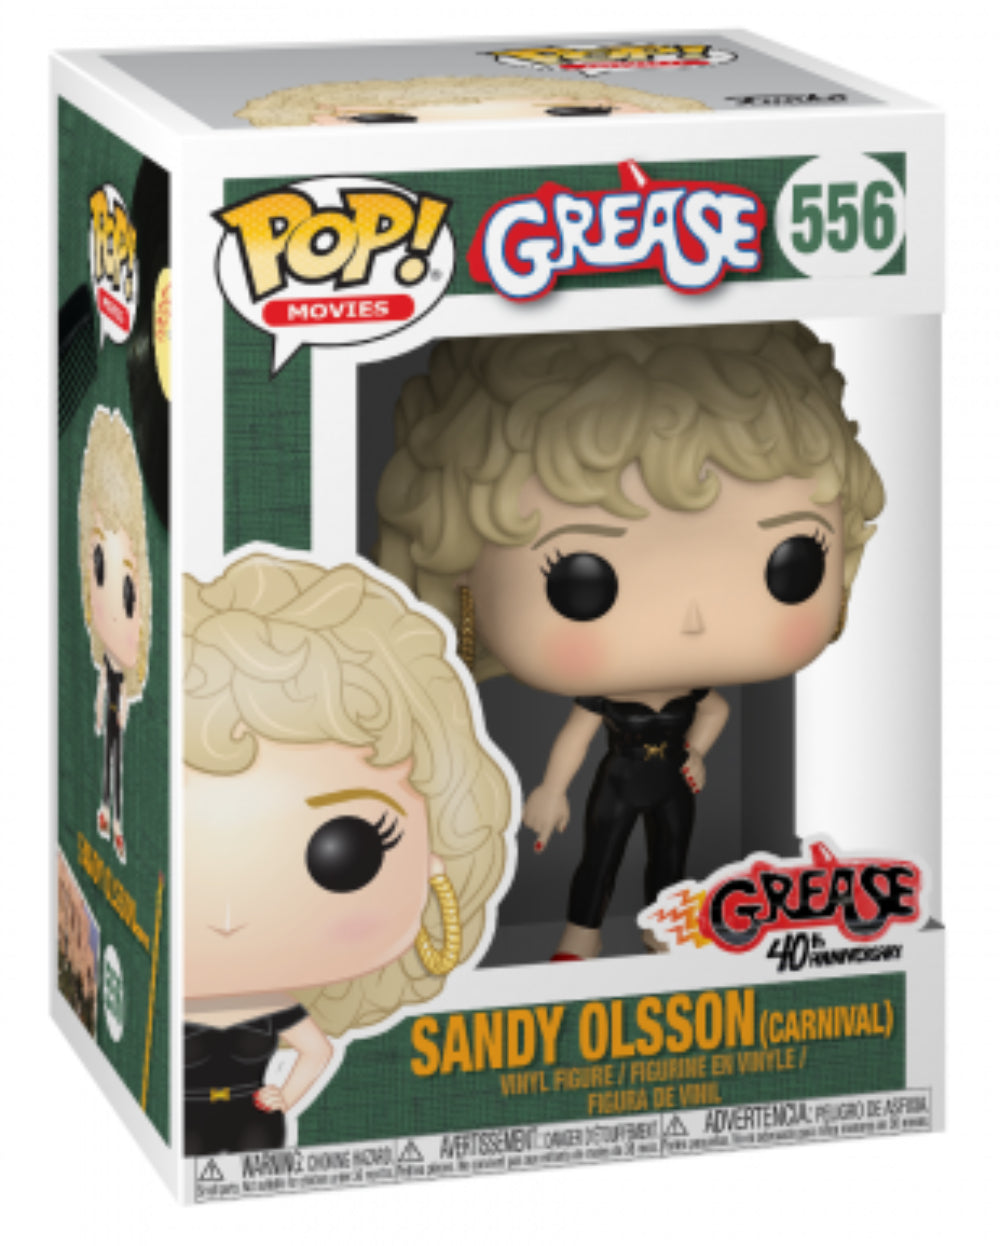 POP! Movies: 556 Grease, Sandy Olsson (Carnival)